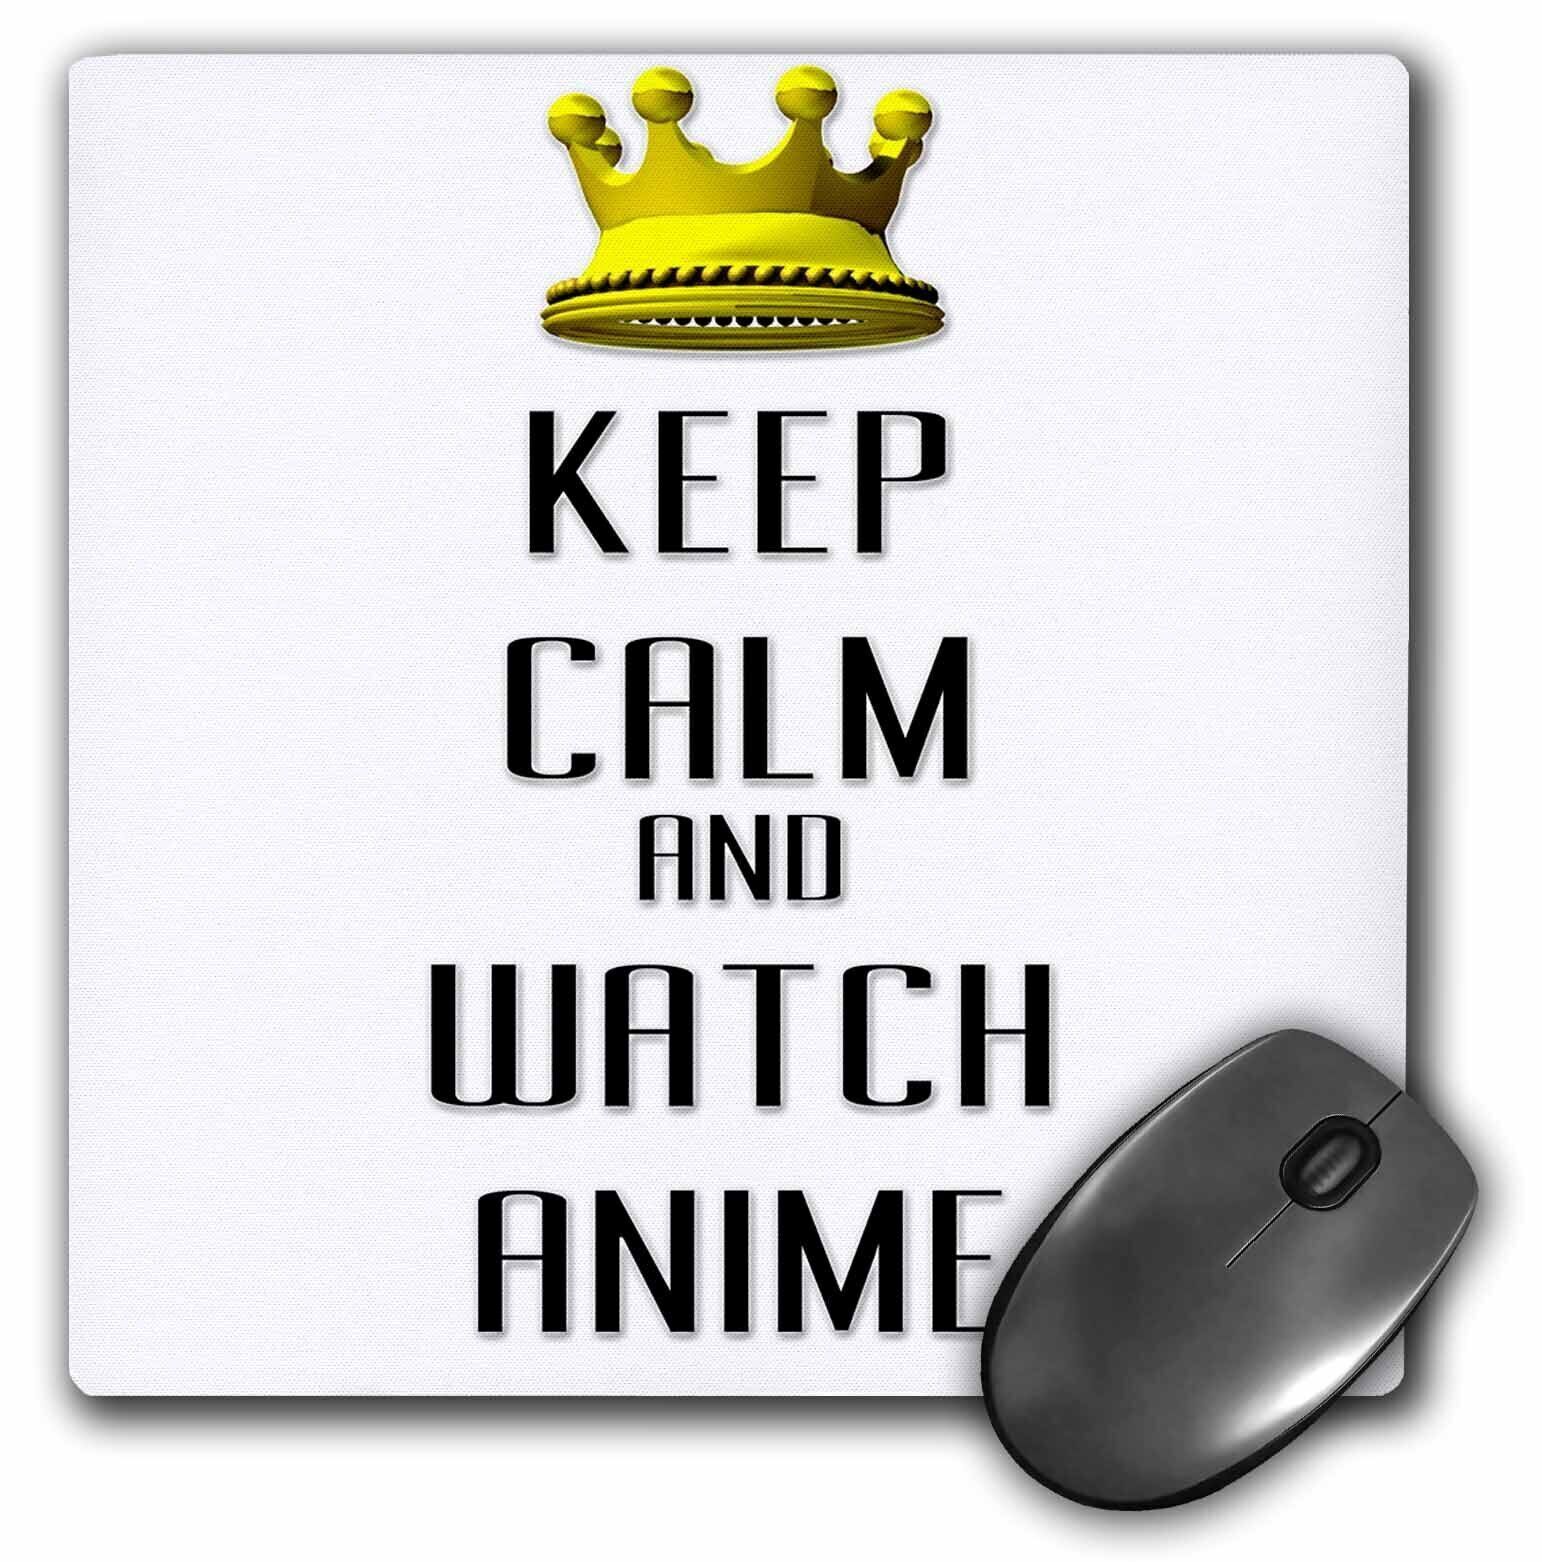 3dRose  Gold Crown Keep Calm And Watch Anime MousePad